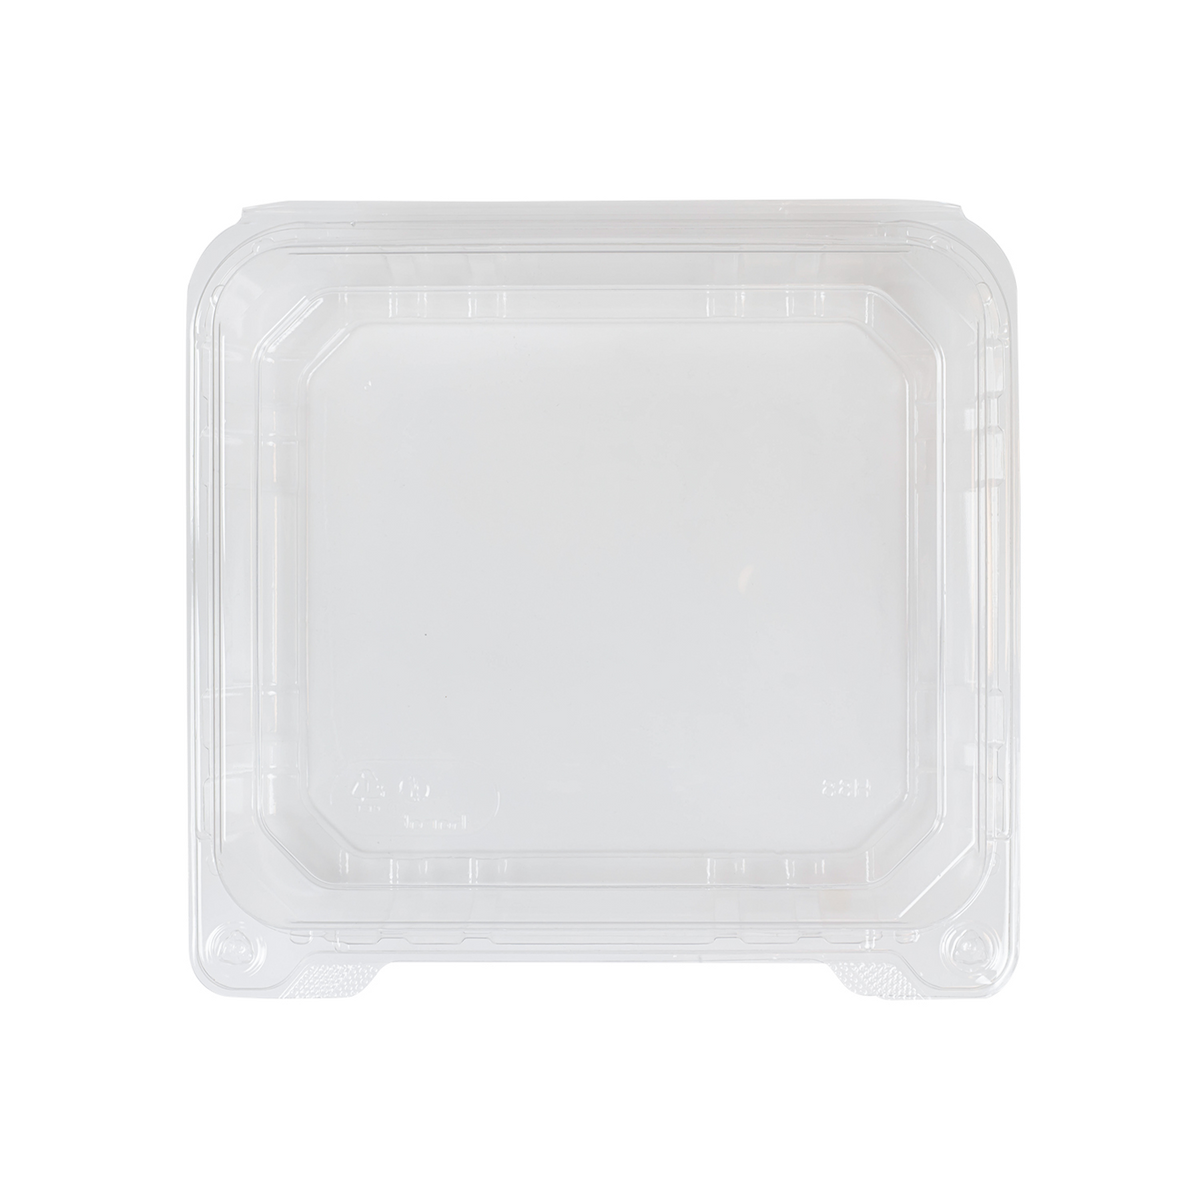 Plastic Carryout / Containers, Containers / Carryout, Food Service